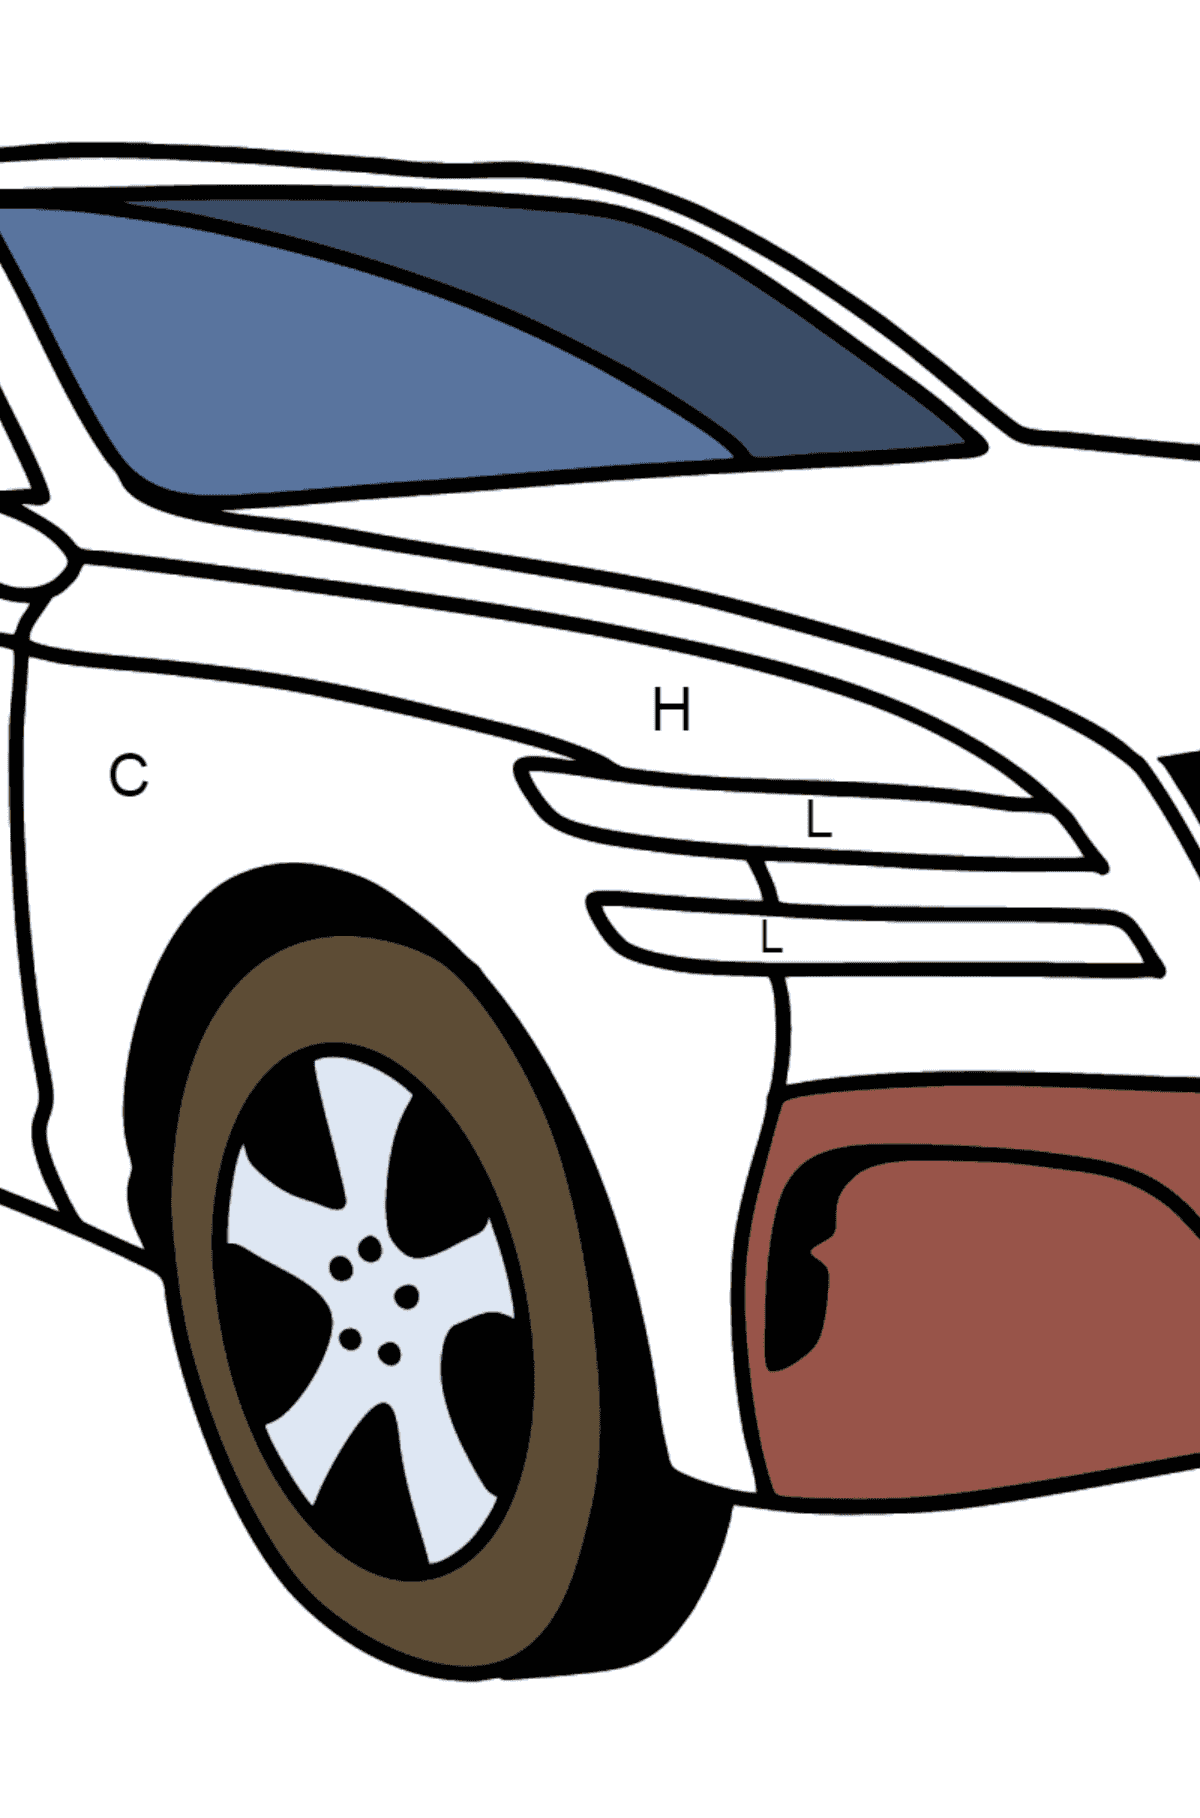 Genesis car coloring page - Coloring by Letters for Kids